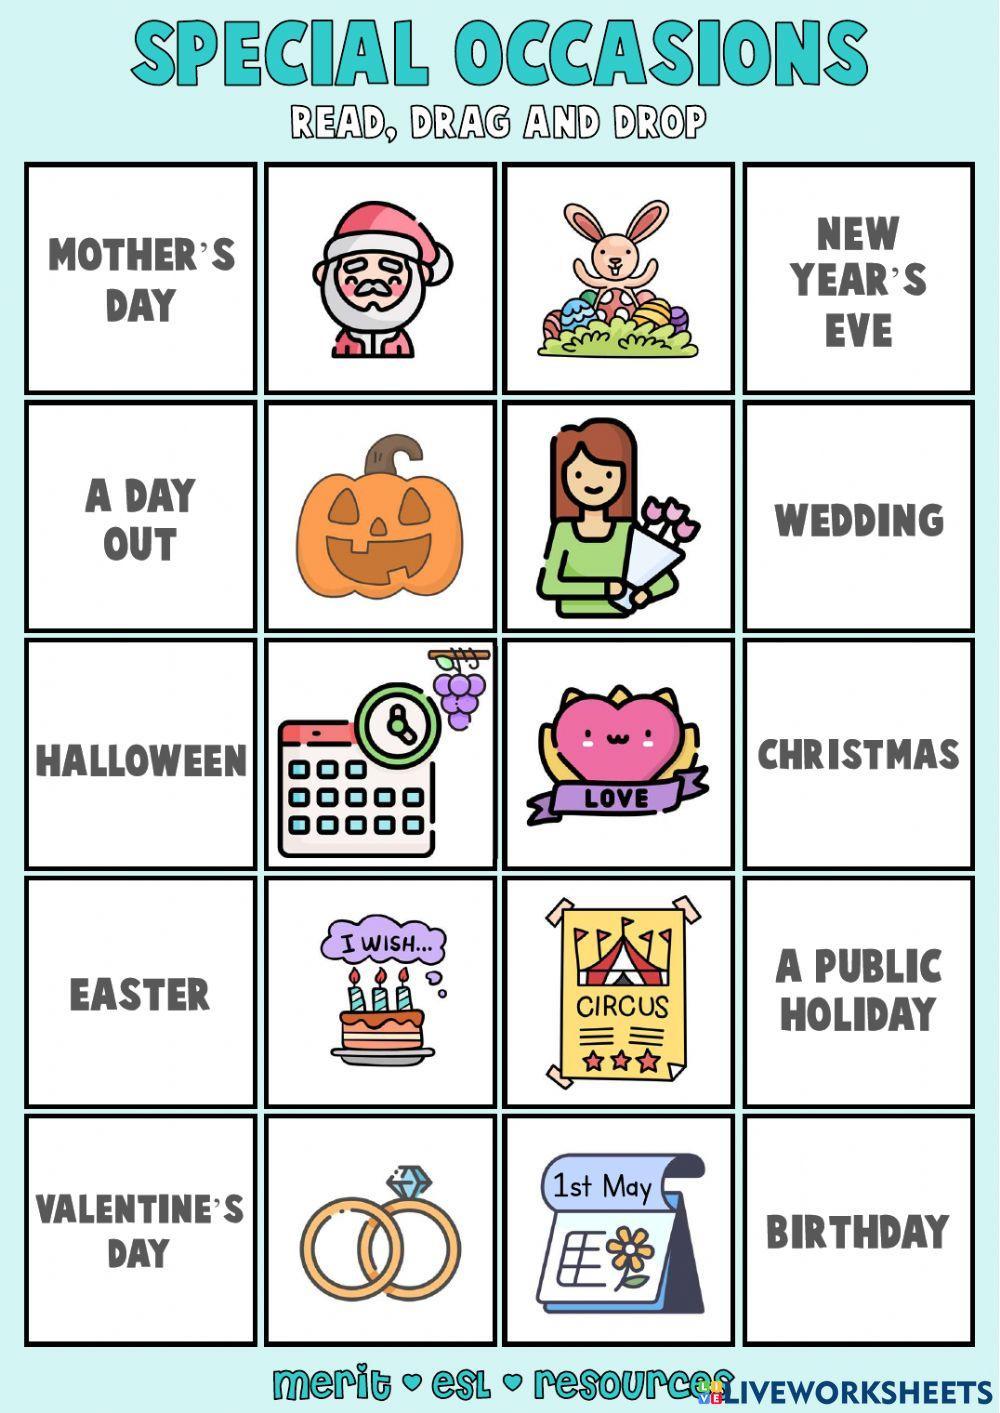 Vocabulary - Special Occasions worksheet